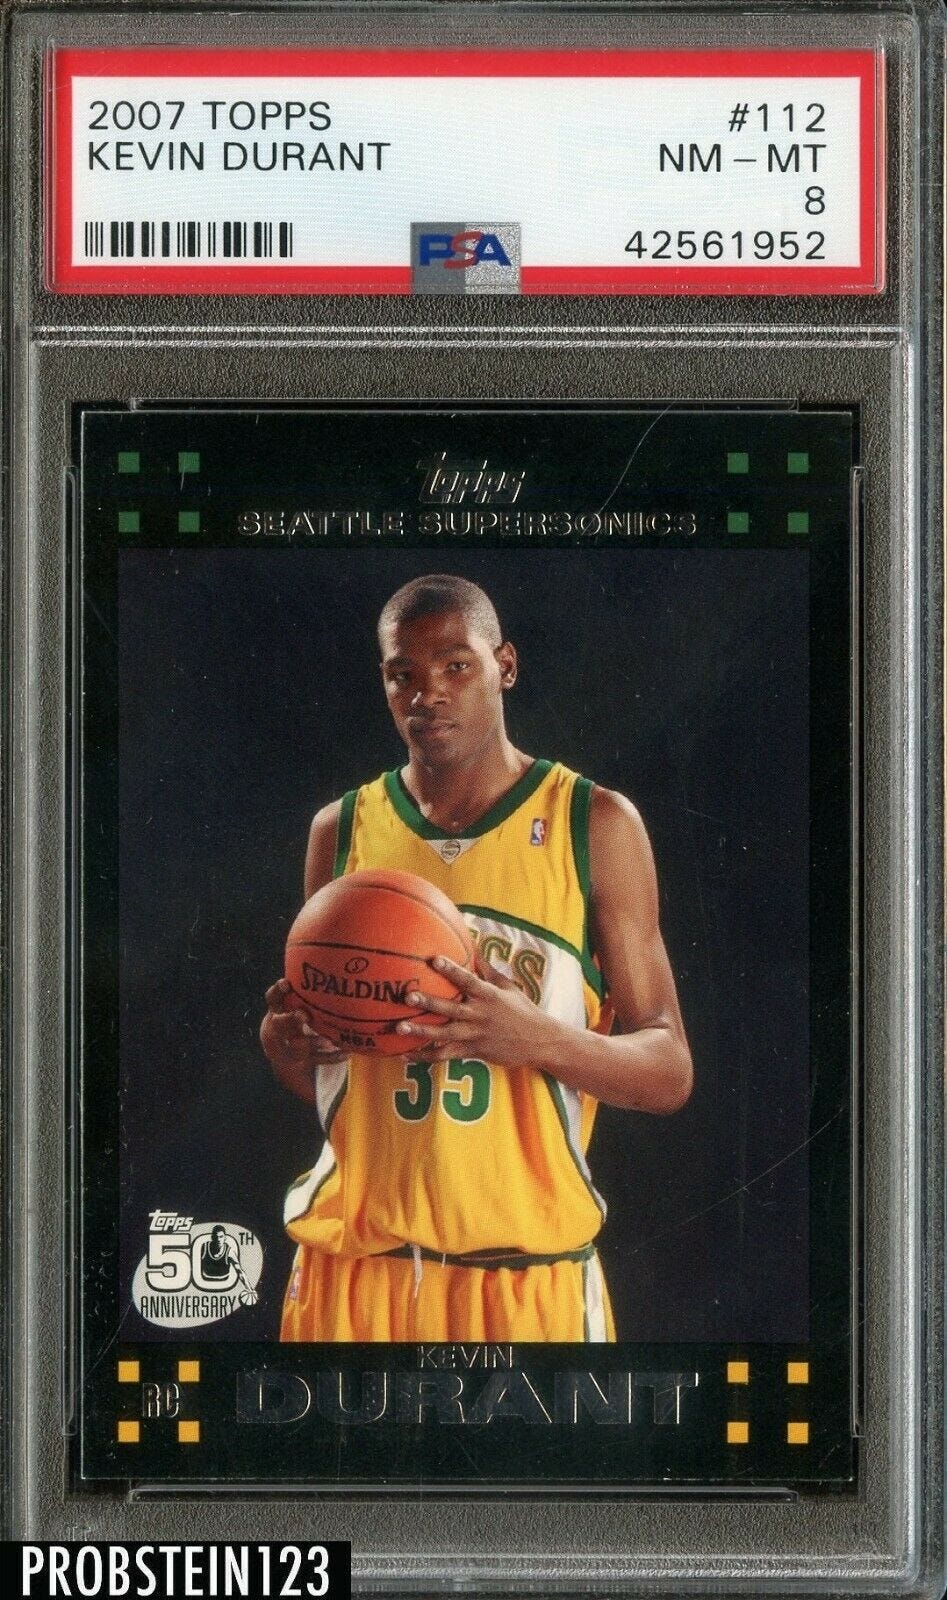 Image 1 - 2007-08-Topps-112-Kevin-Durant-Supersonics-RC-Rookie-PSA-8-NM-MT